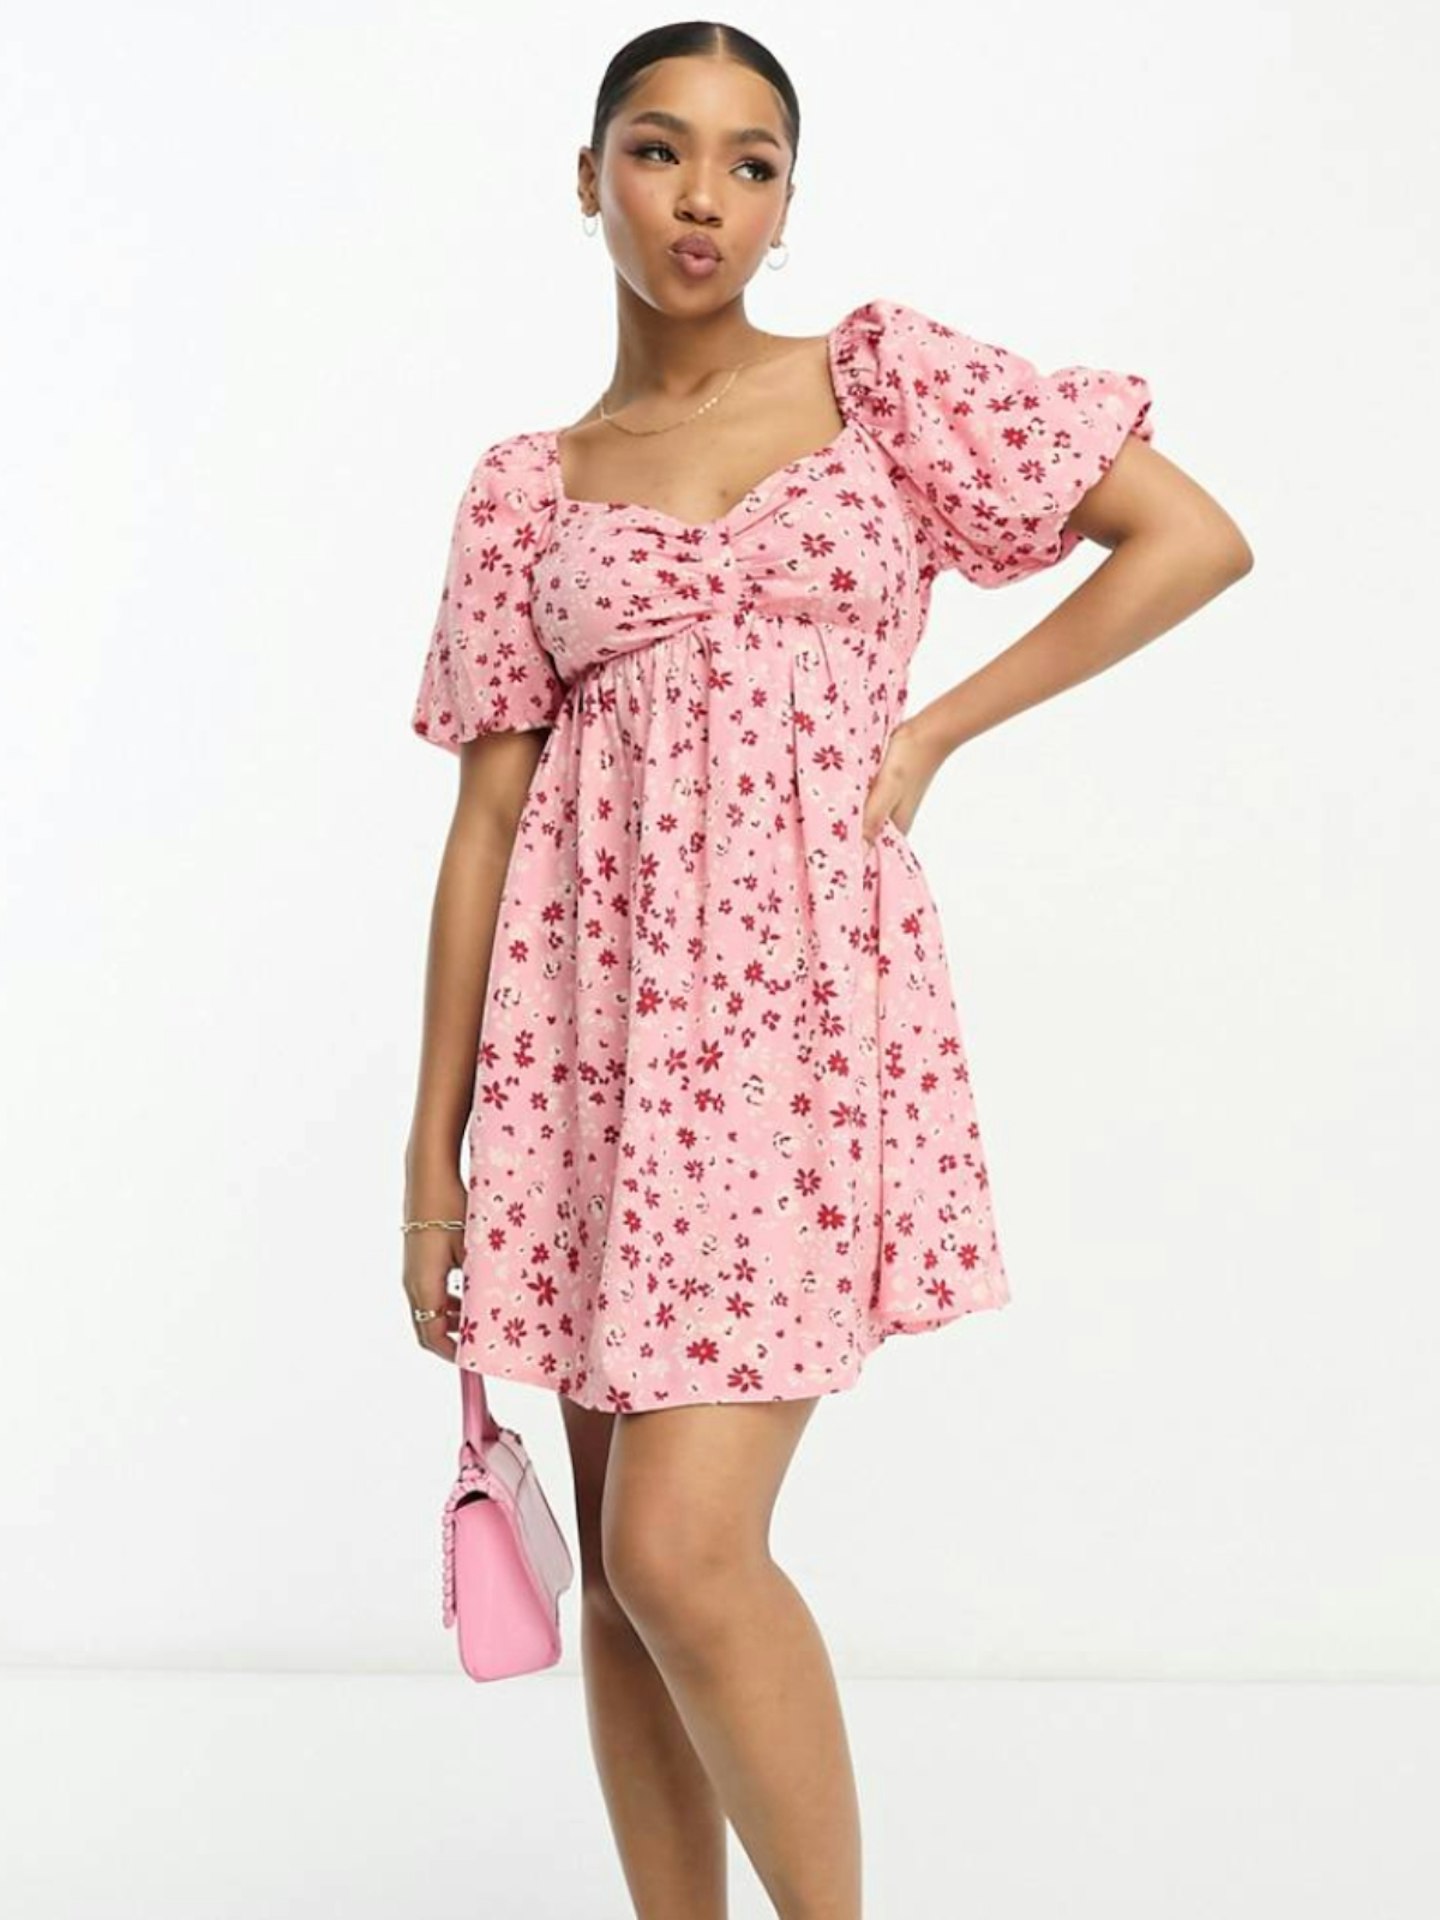 ASOS Wednesday's Girl Puff Sleeve Ditsy Floral Print Mini Dress in Pink